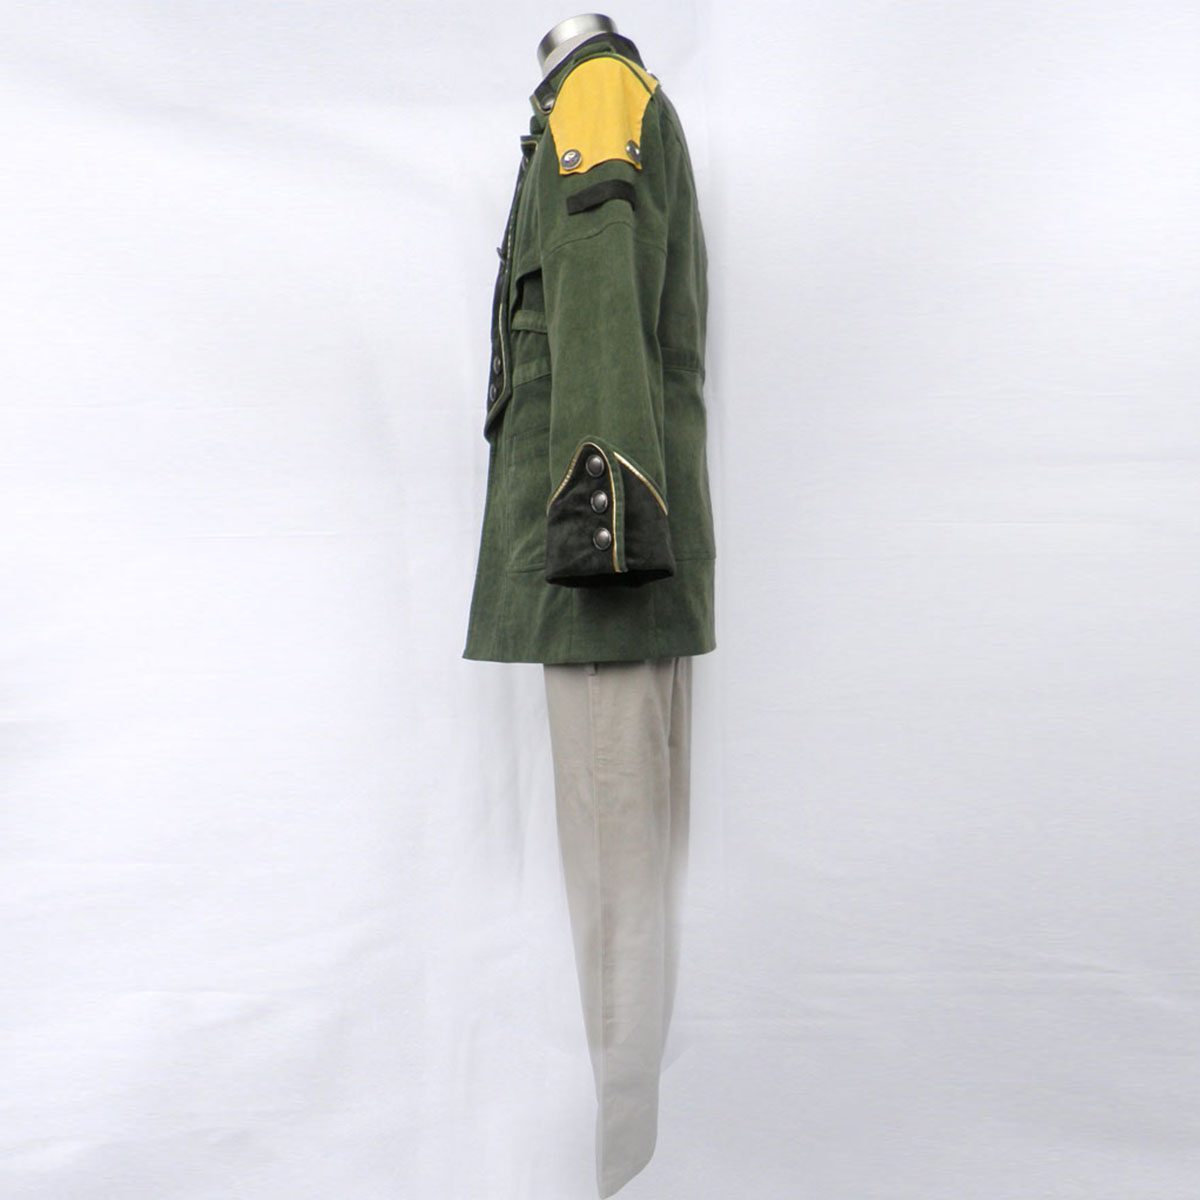 Final Fantasy XIII Sazh Katzroy 1 Anime Cosplay Costumes Outfit